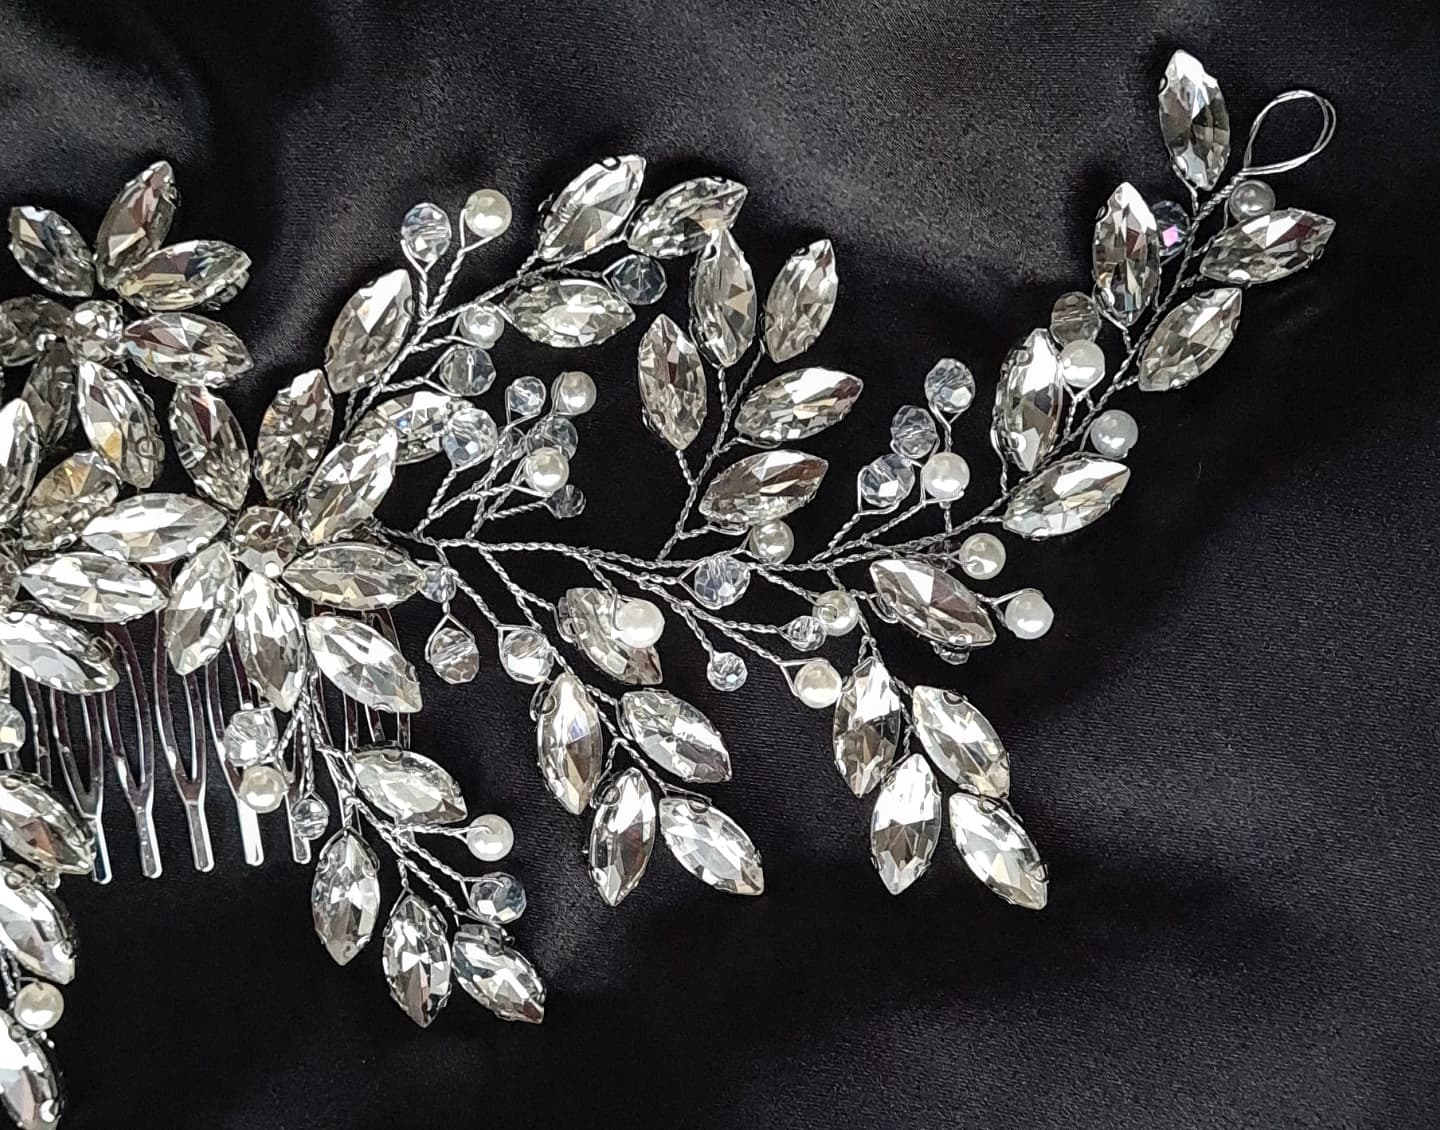 a close up view of A hair comb with rhinestones and leaves on a black background. It has a delicate design with leaves and flowers. The rhinestones are clear and sparkling. The background is black.